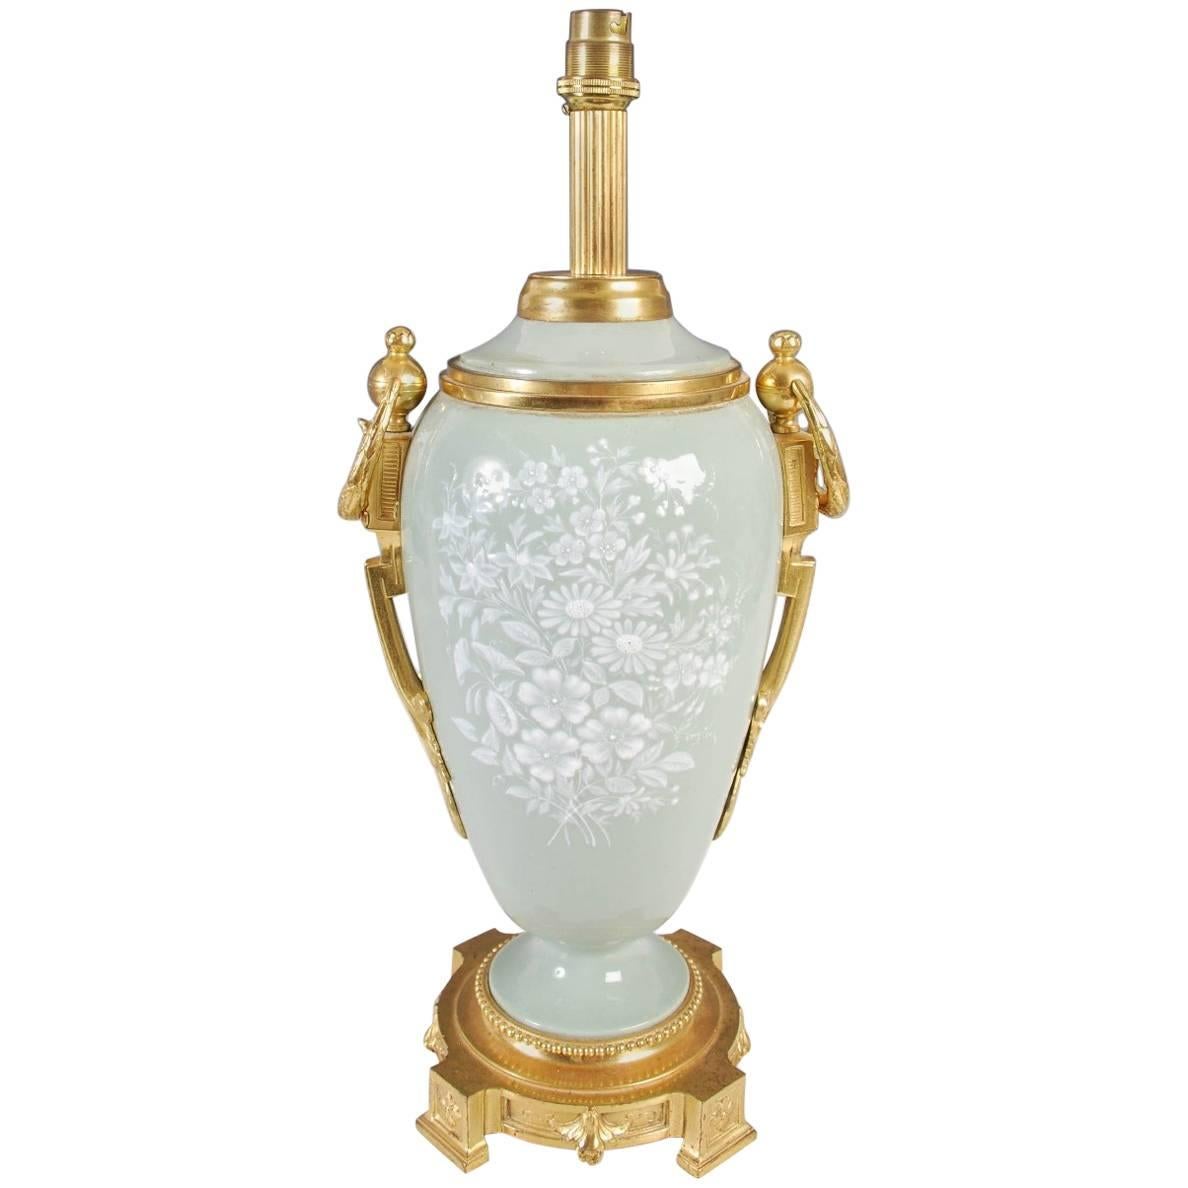 Antique French Ormolu-Mounted Pate-sur-pate Table Lamp, 19th Century